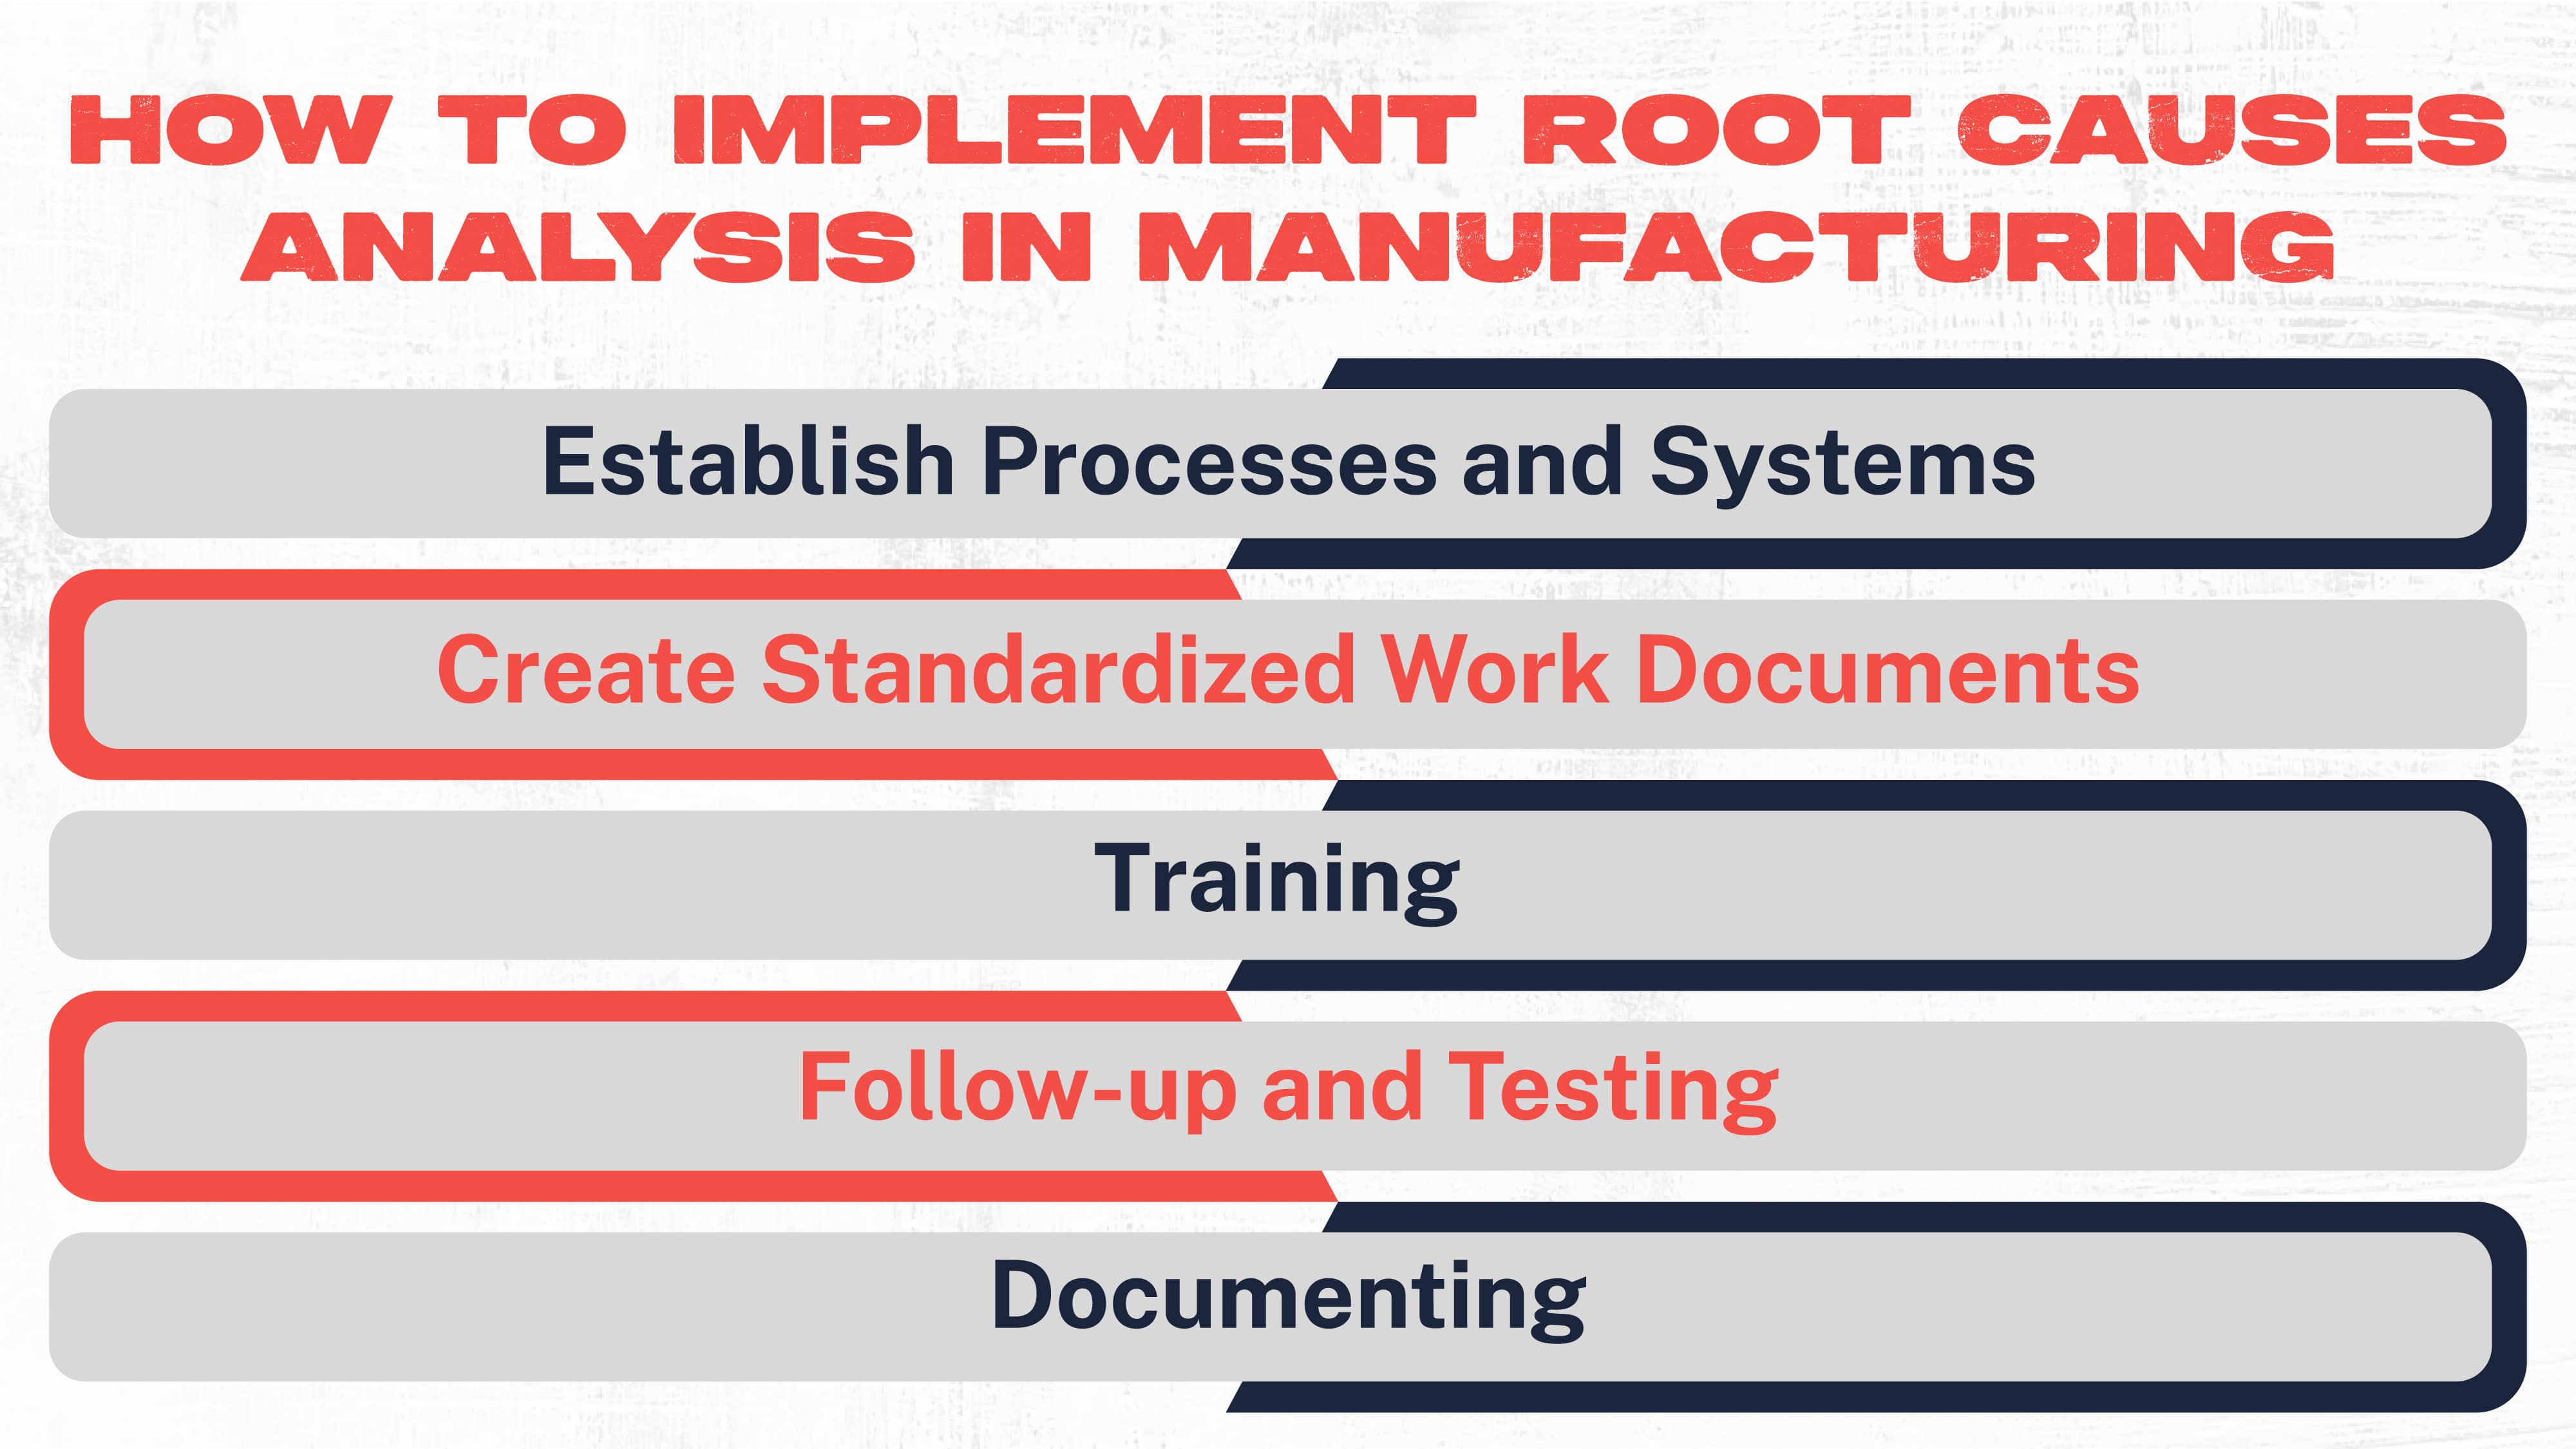 Implement Root Causes Analysis in Manufacturing